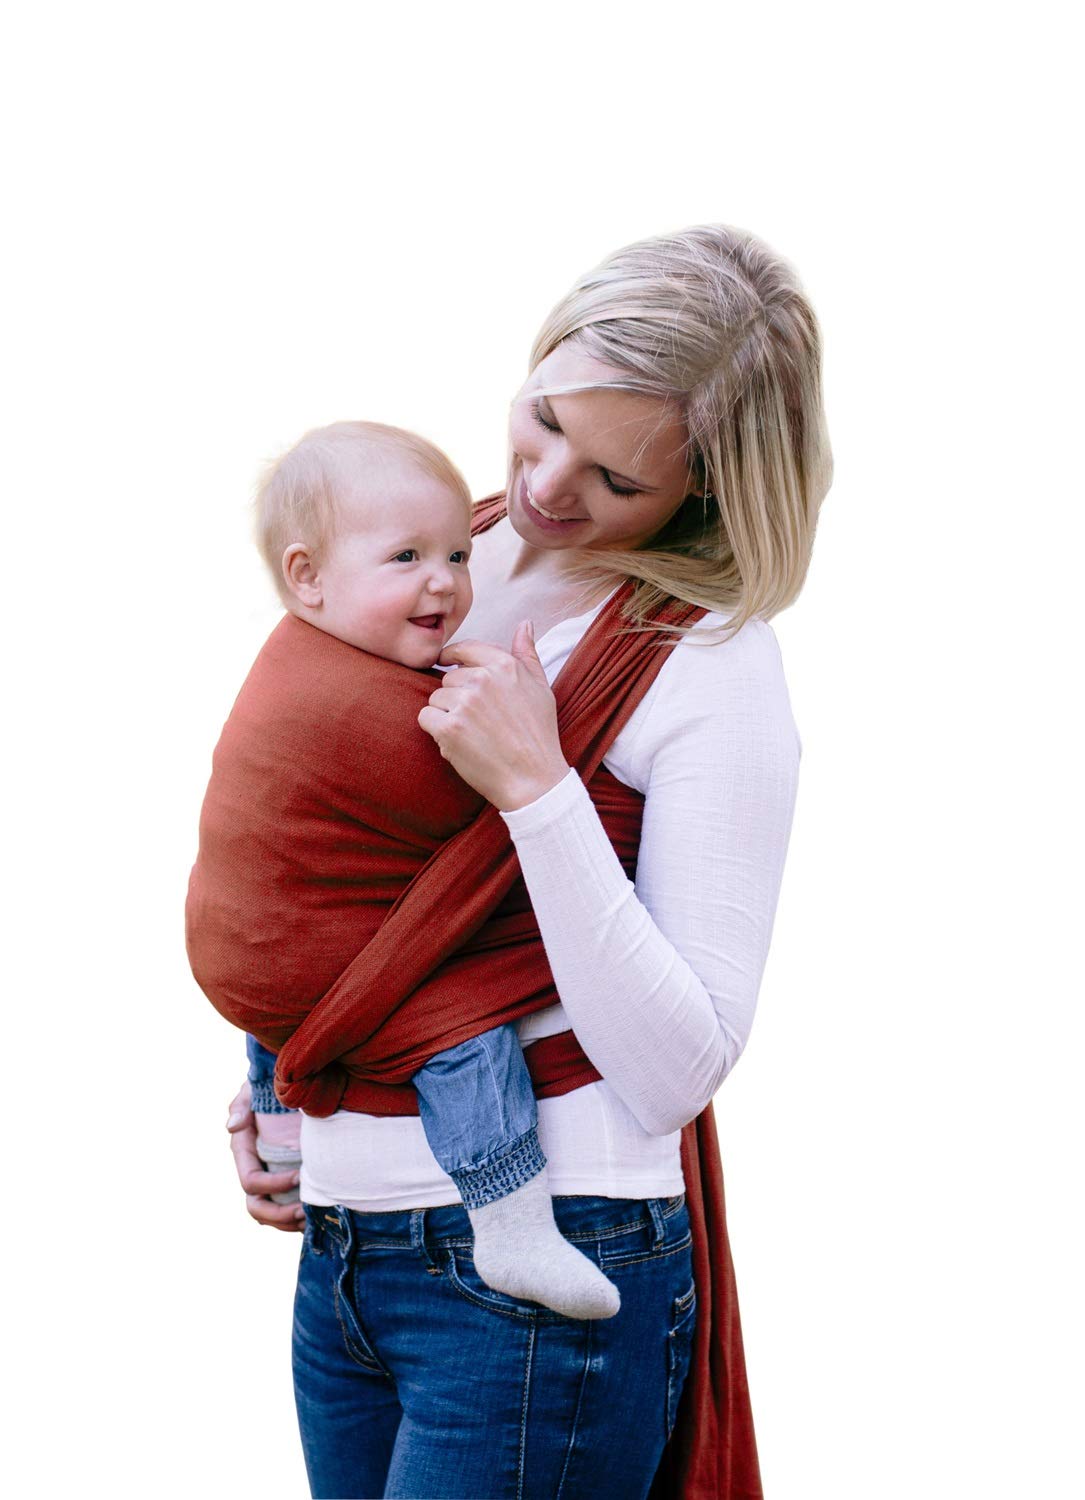 AMAZONAS Baby Carrier Sling Terra – Test Winner at Stiftung Warentest with Best Score 1.7-510 cm 0-3 Years up to 15 kg in Dark Red